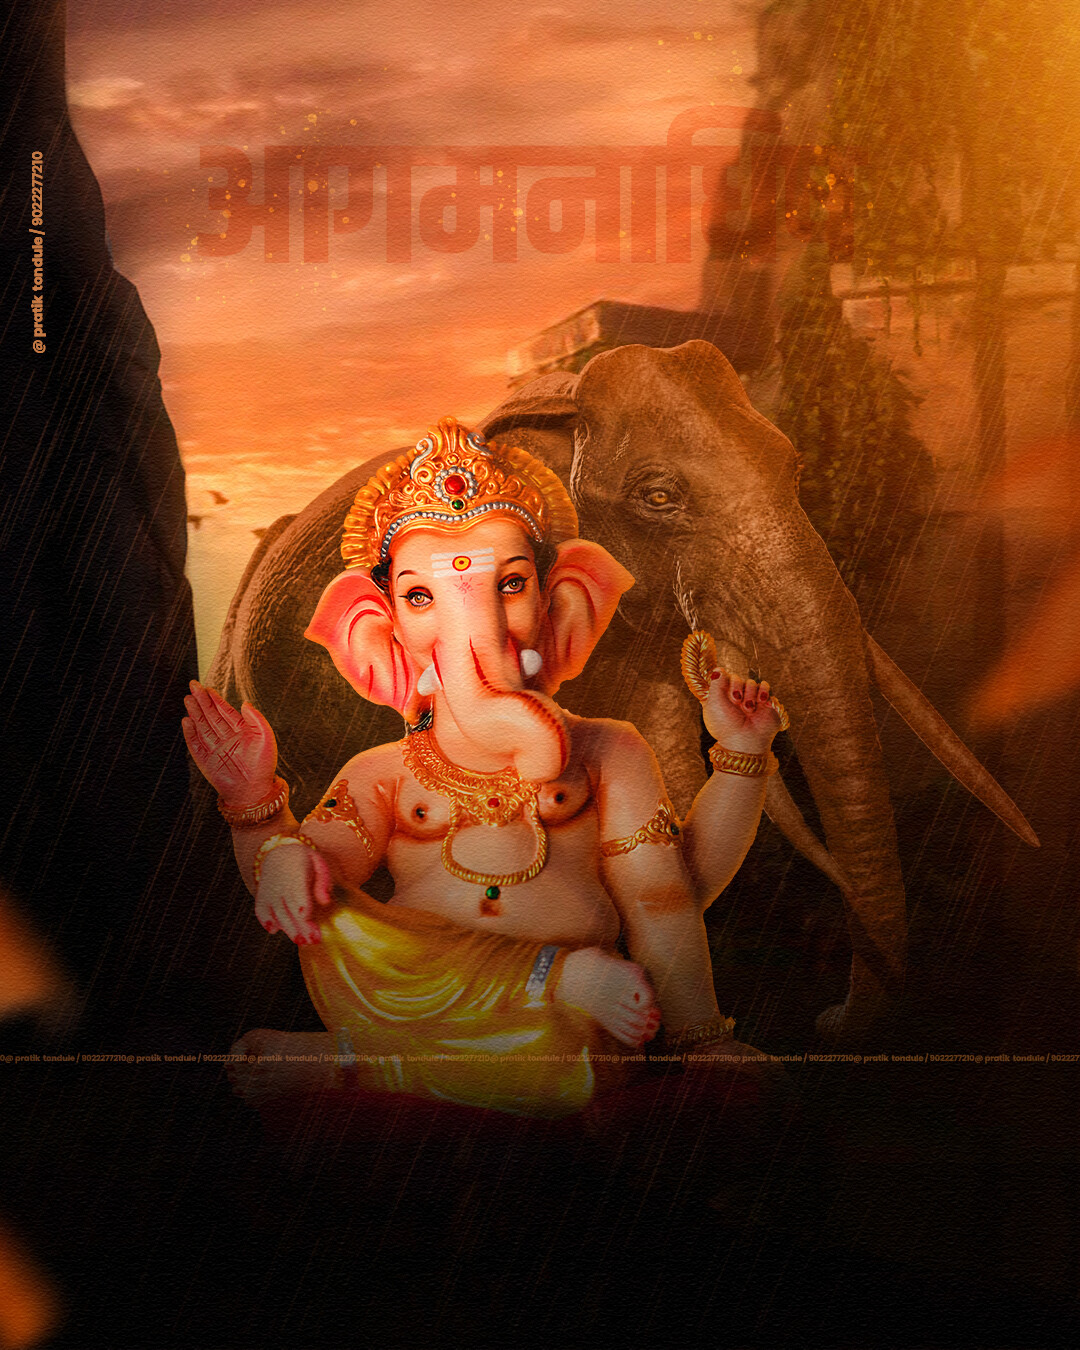 Amazing Collection of 999+ Cute Ganpati Bappa HD Images in Full 4K